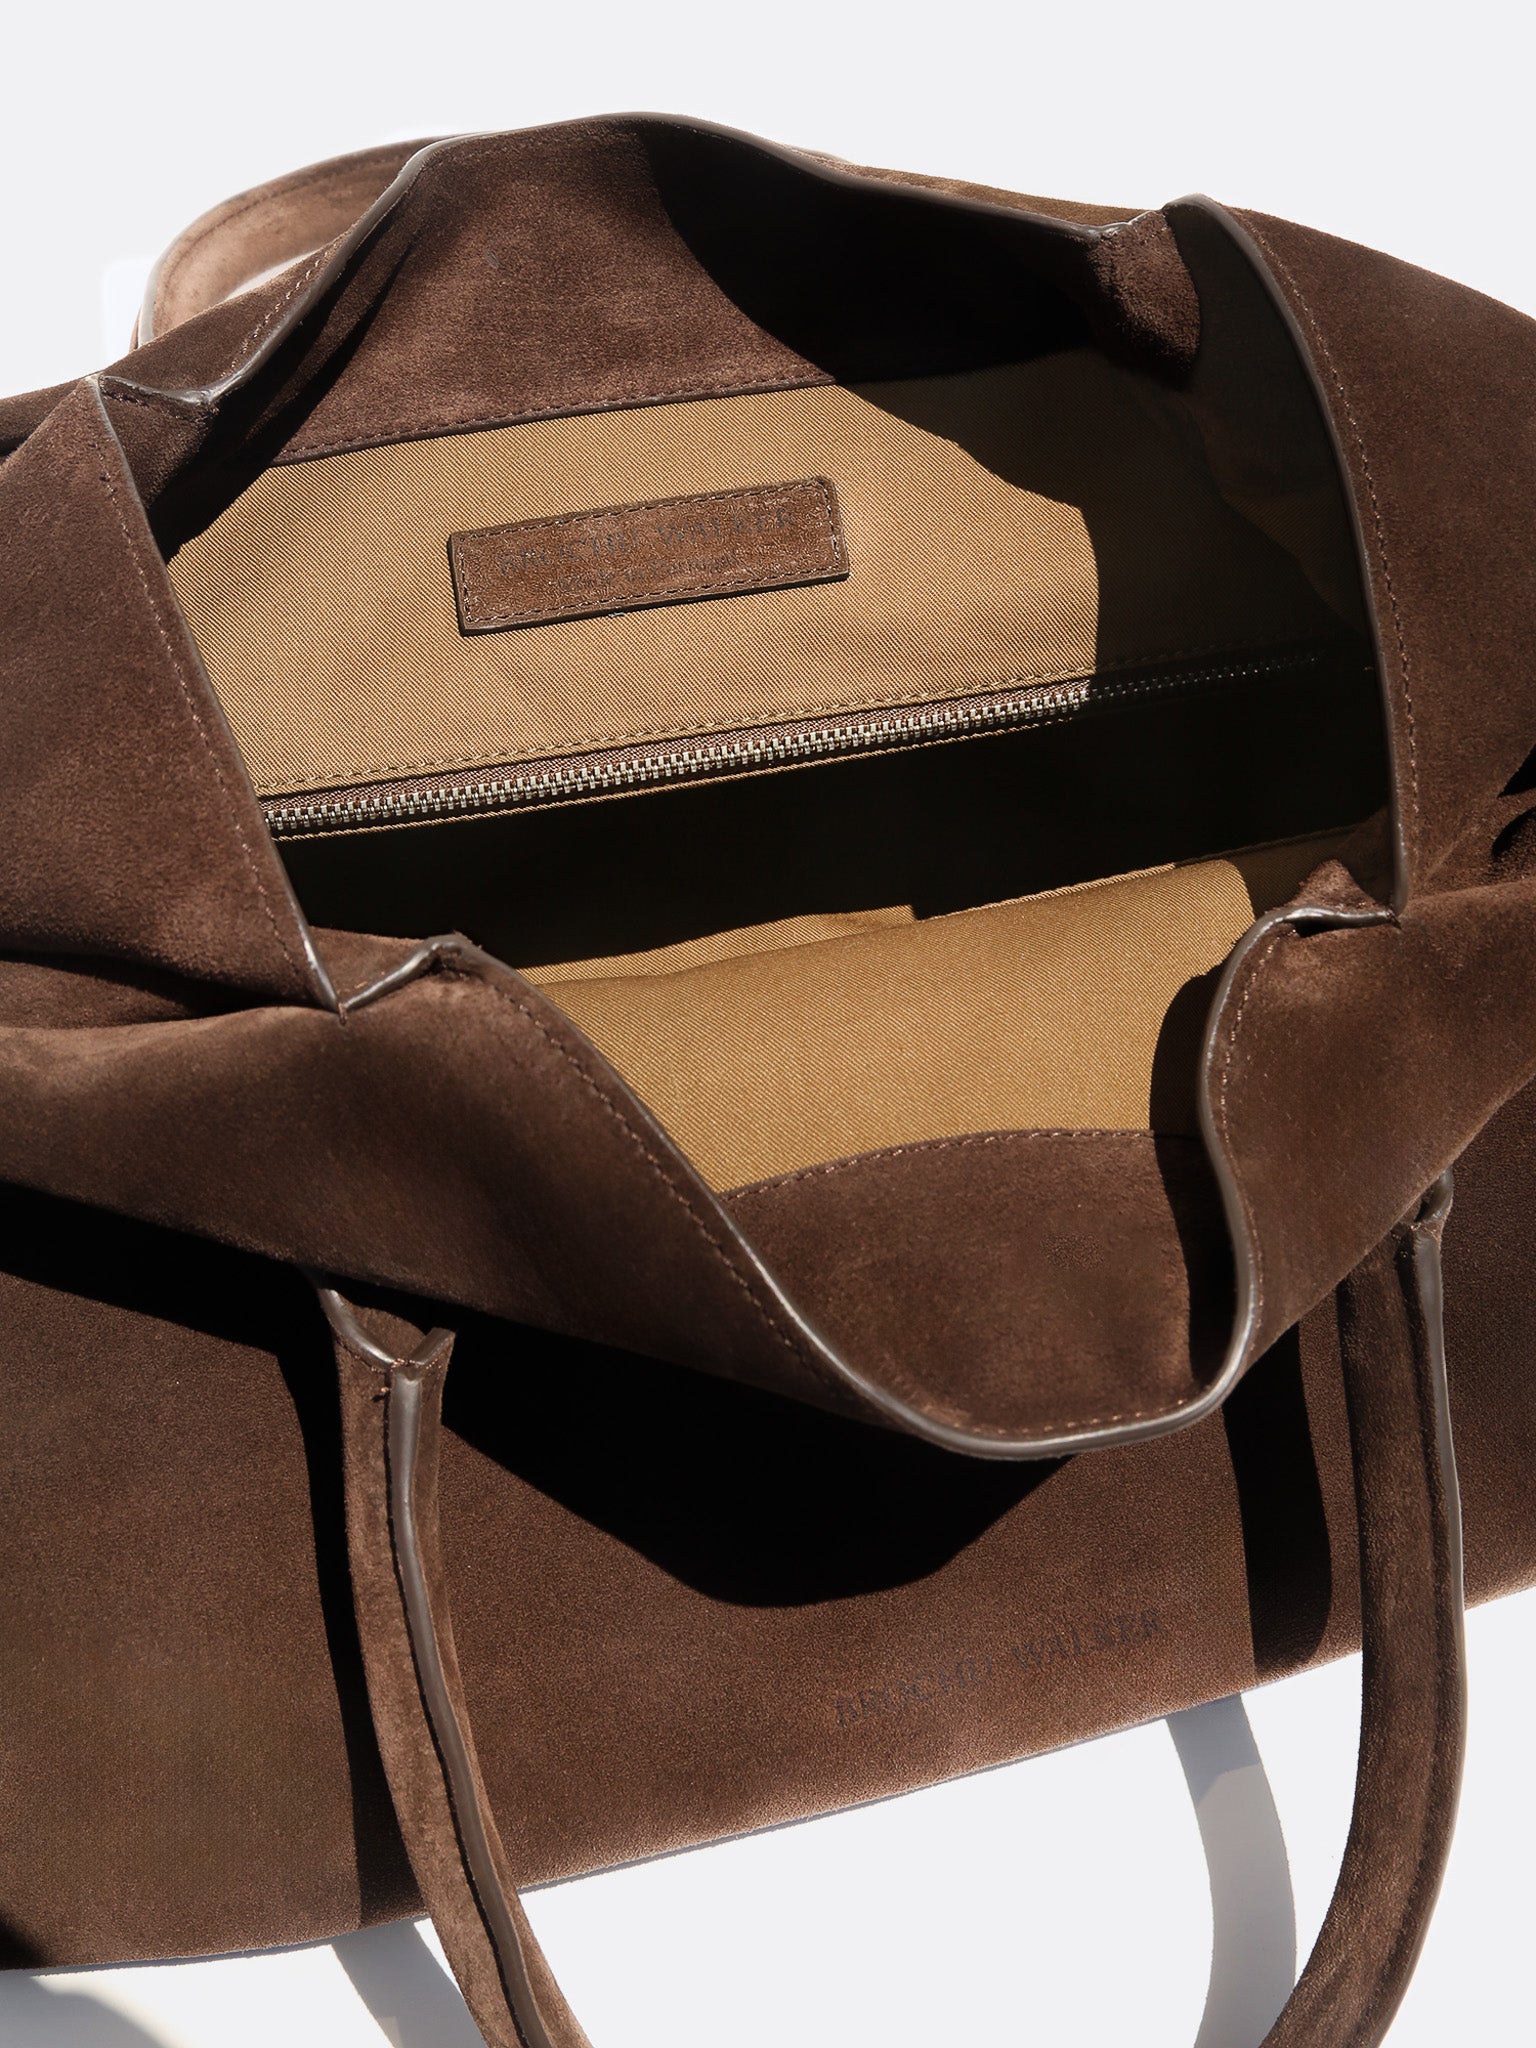 Everday brown tote bag inside view